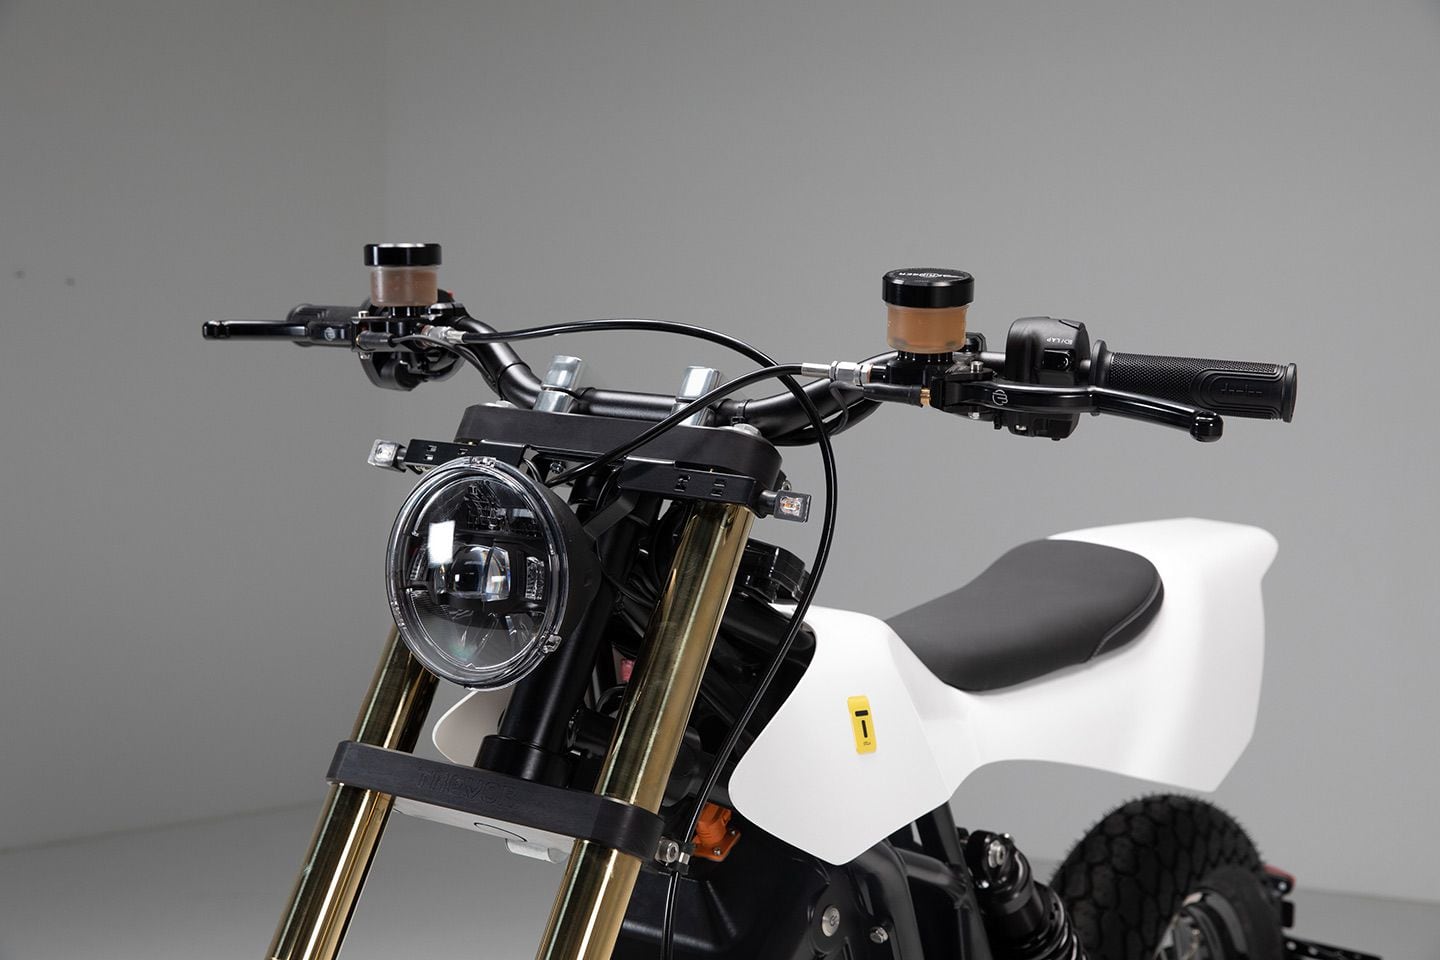 LED lighting and an aluminum flat-track-style Domino Racing bar define the front end.